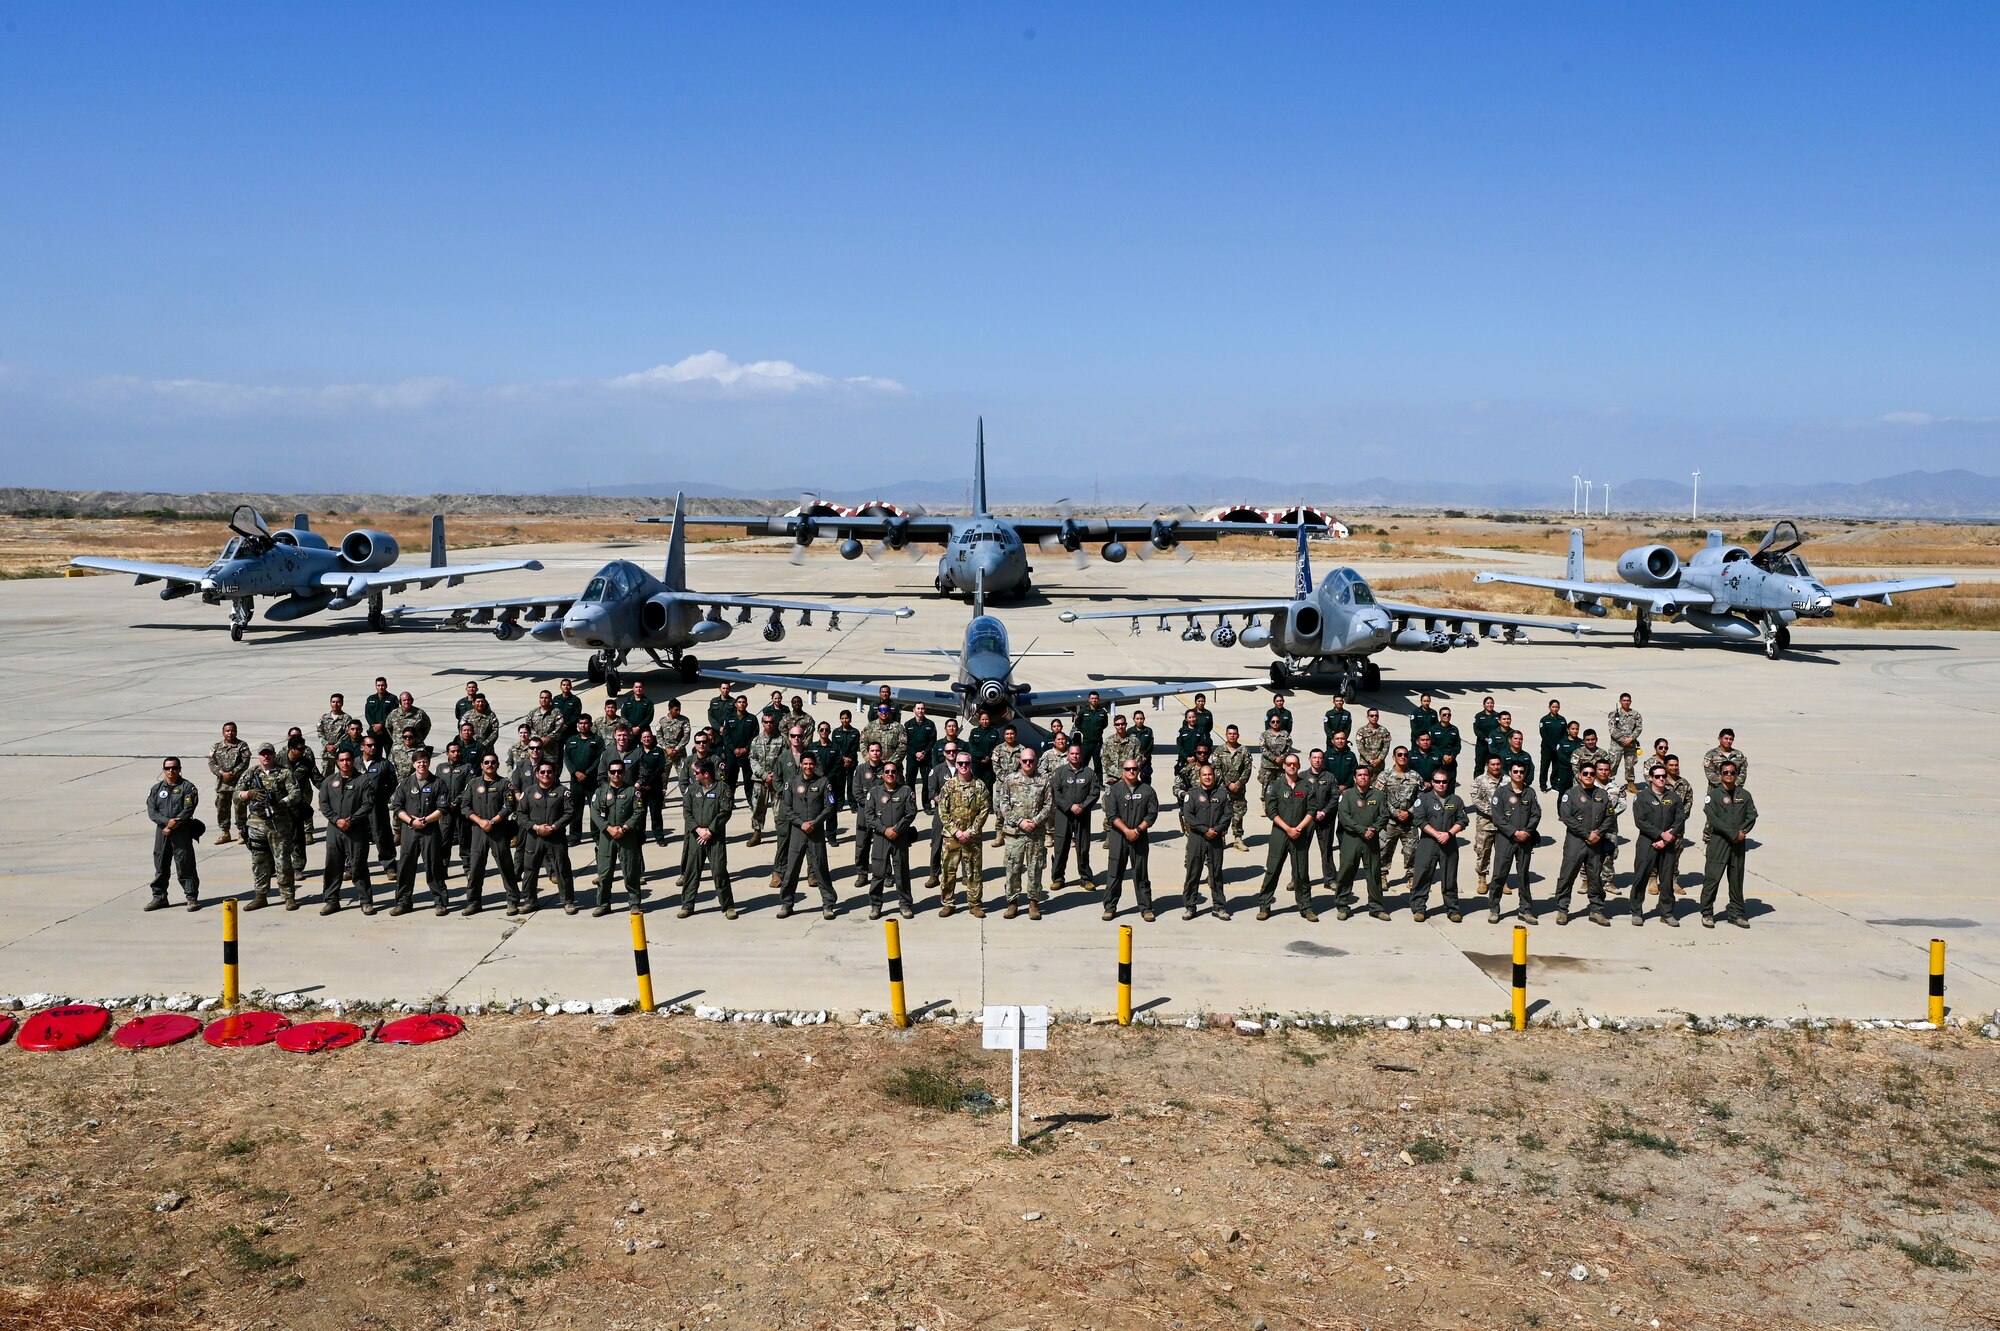 U.S Air Force and Fuerza Aerea del Peru Airmen come together in a formation to pose for a picture in front of (back to front) a C-130 cargo aircraft, two A-10 attack aircraft, two SU-25 attack aircraft, and a KT-1 light attack aircraft July 19, 2023, at El Pato Air Base, Peru. During exercise Patriot Fury, A-10 pilots trained with SU-25 and KT-1 pilots on close air support and combat search and rescue missions. (U.S. Air Force photo by Master Sgt. Bob Jennings)